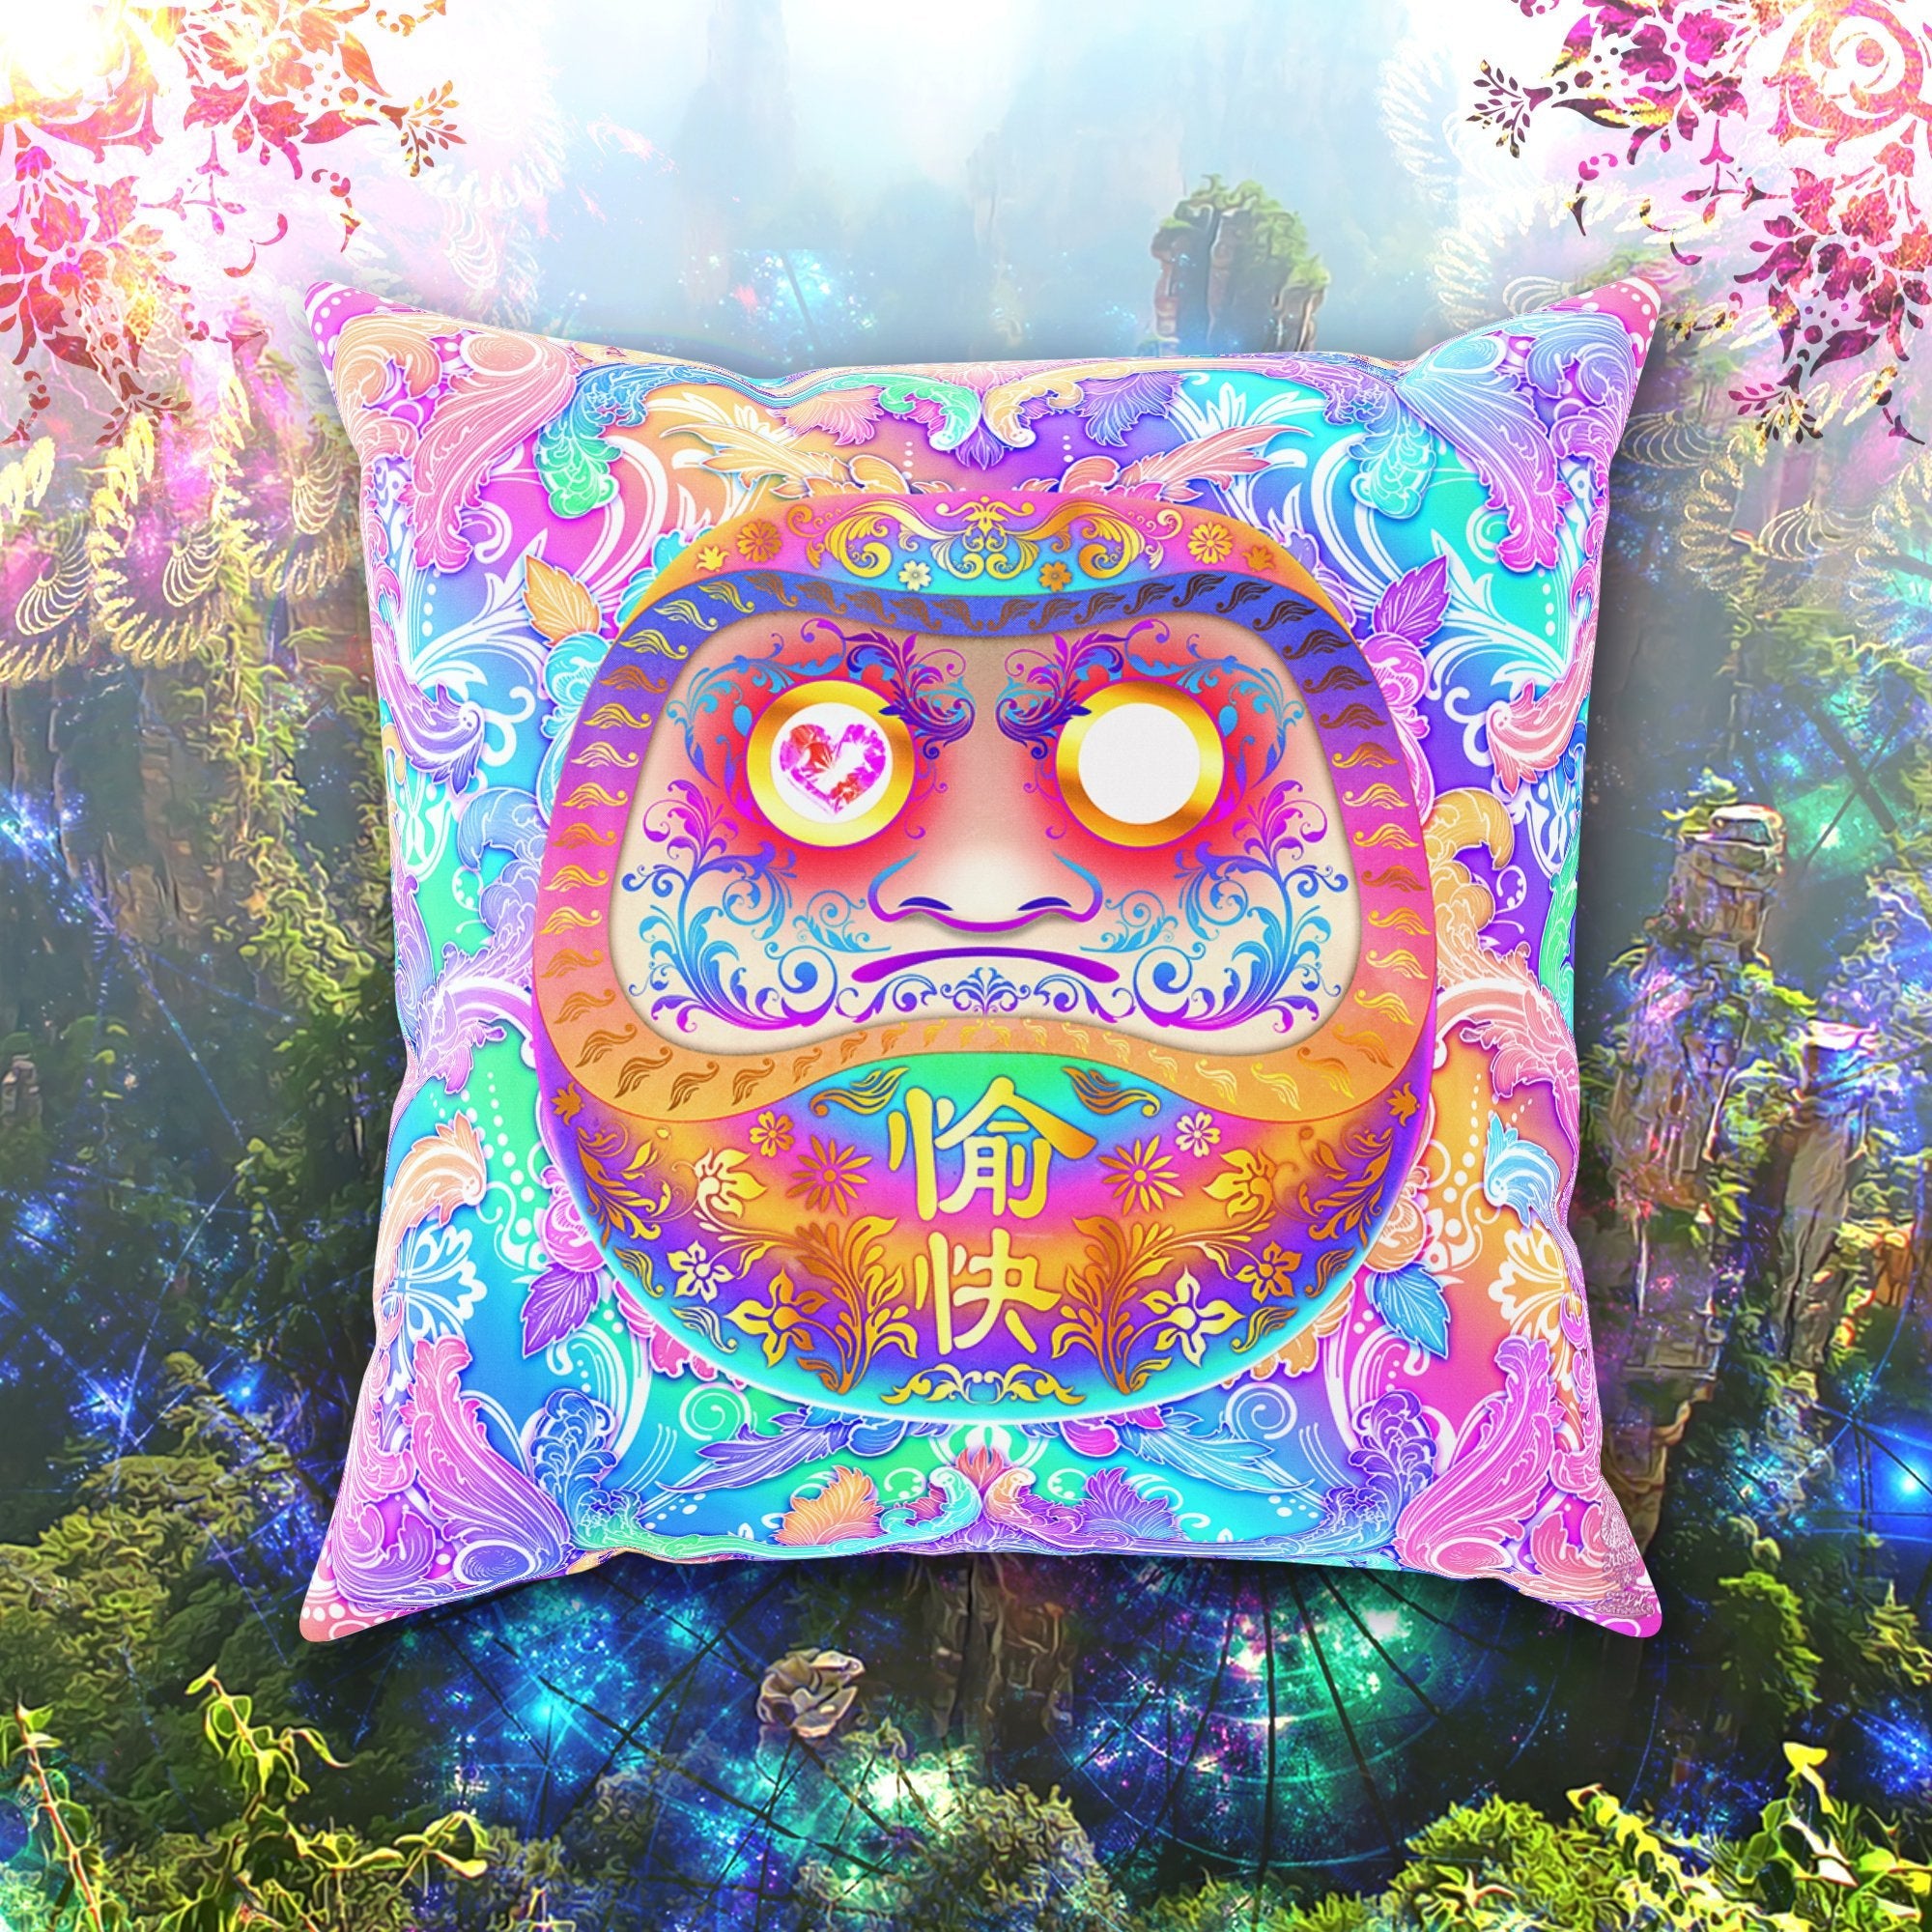 Holographic Throw Pillow, Decorative Accent Cushion, Funny, Aesthetic and Psychedelic Room Decor, Fairy Kei and Yume Kawaii style, Funky and Eclectic Home - Pastel Daruma - Abysm Internal